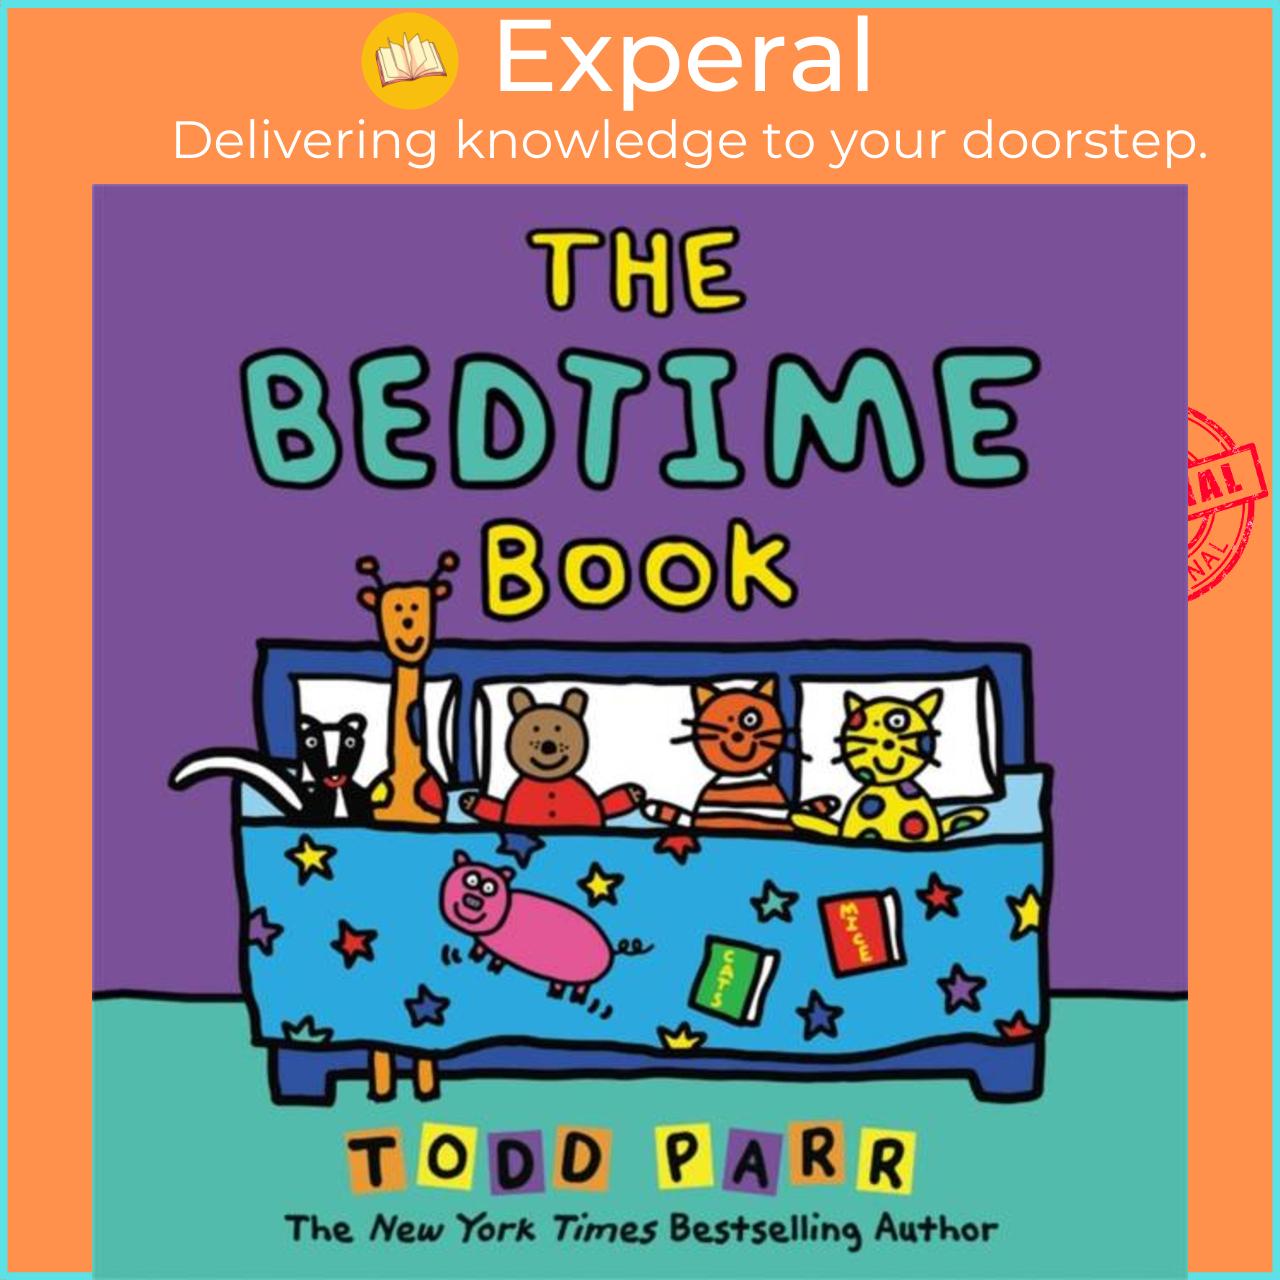 Sách - The Bedtime Book by Todd Parr (UK edition, hardcover)